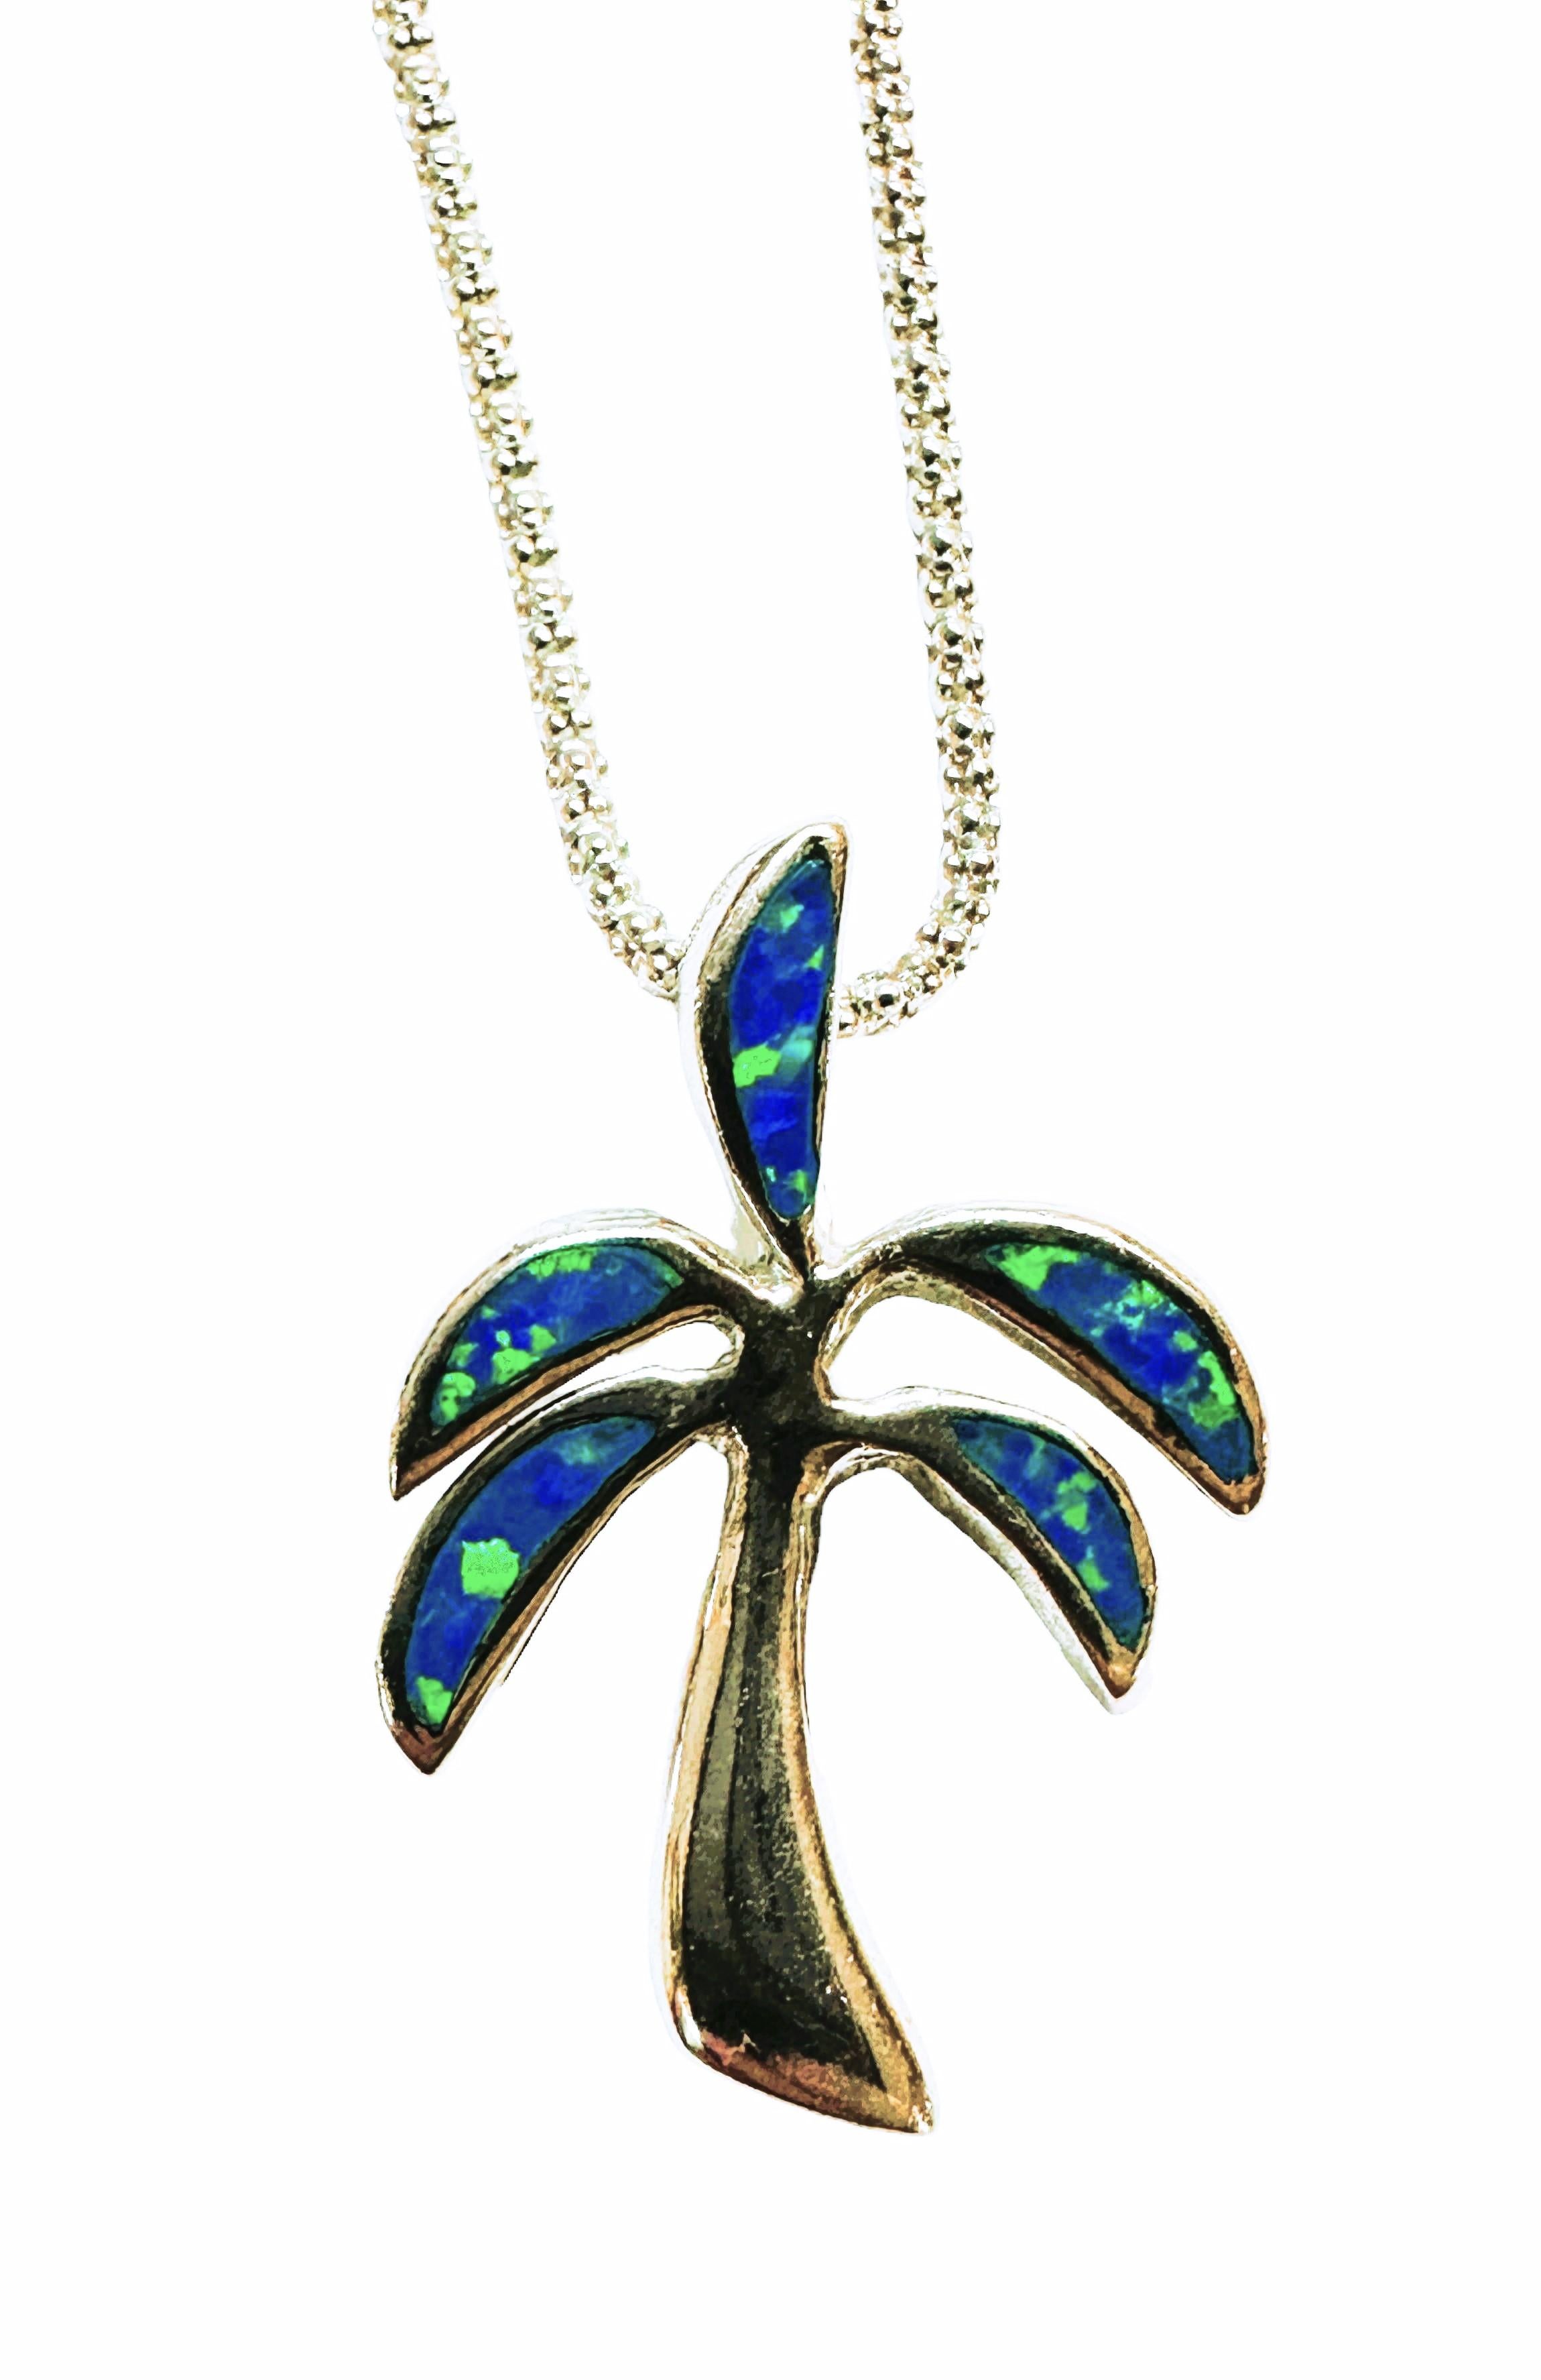 Mixed Cut Sterling Silver Inlaid Opal Palm Tree Pendant Necklace 18